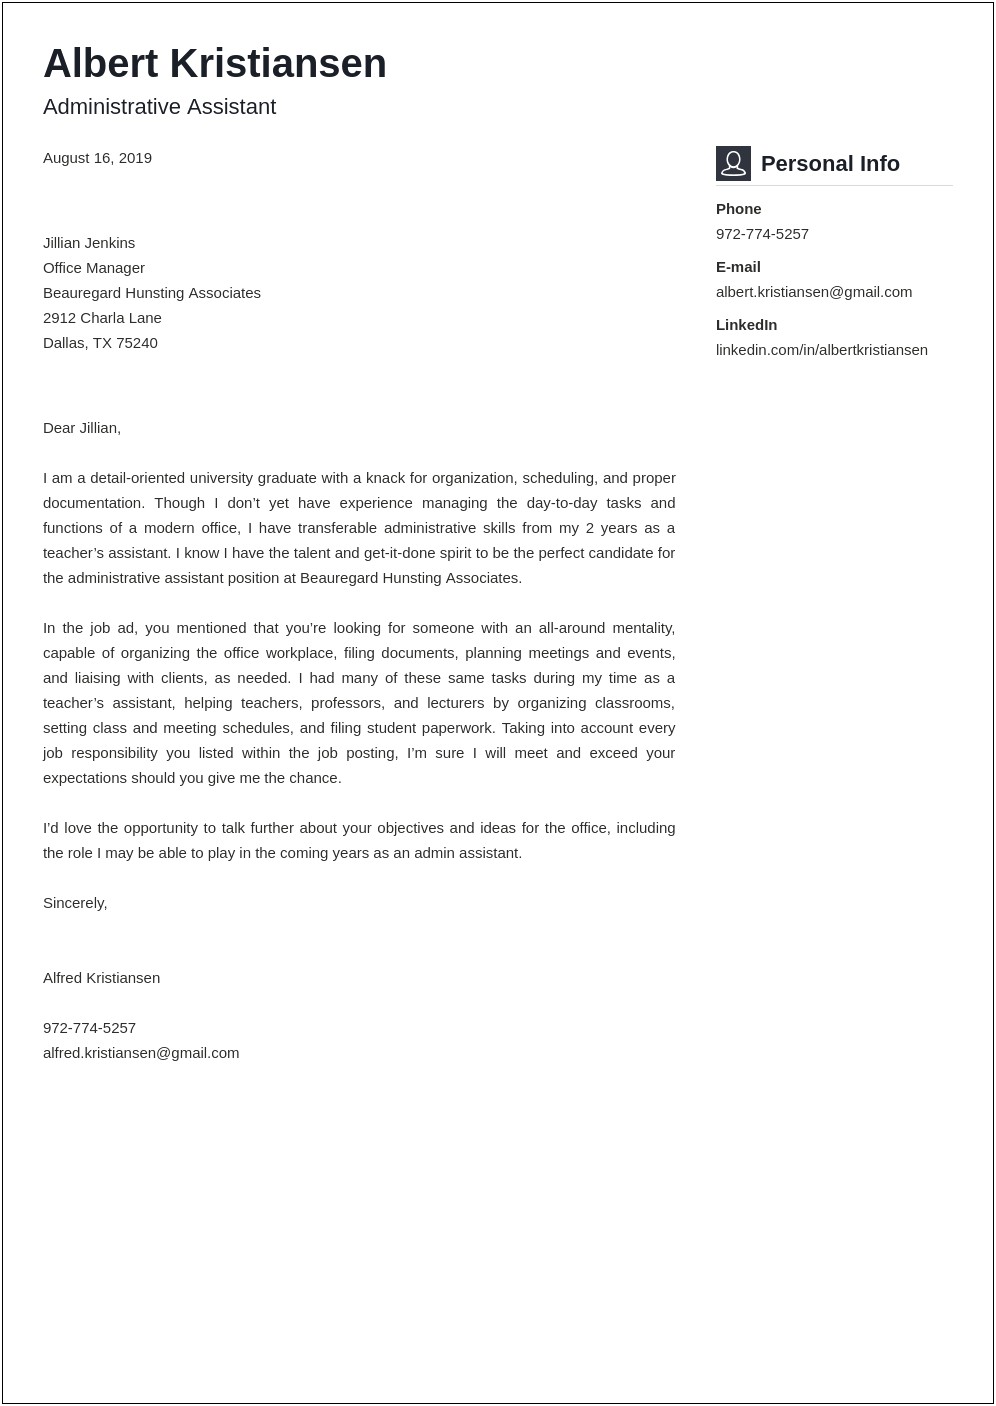 Resume Cover Letter Example Clerical Job